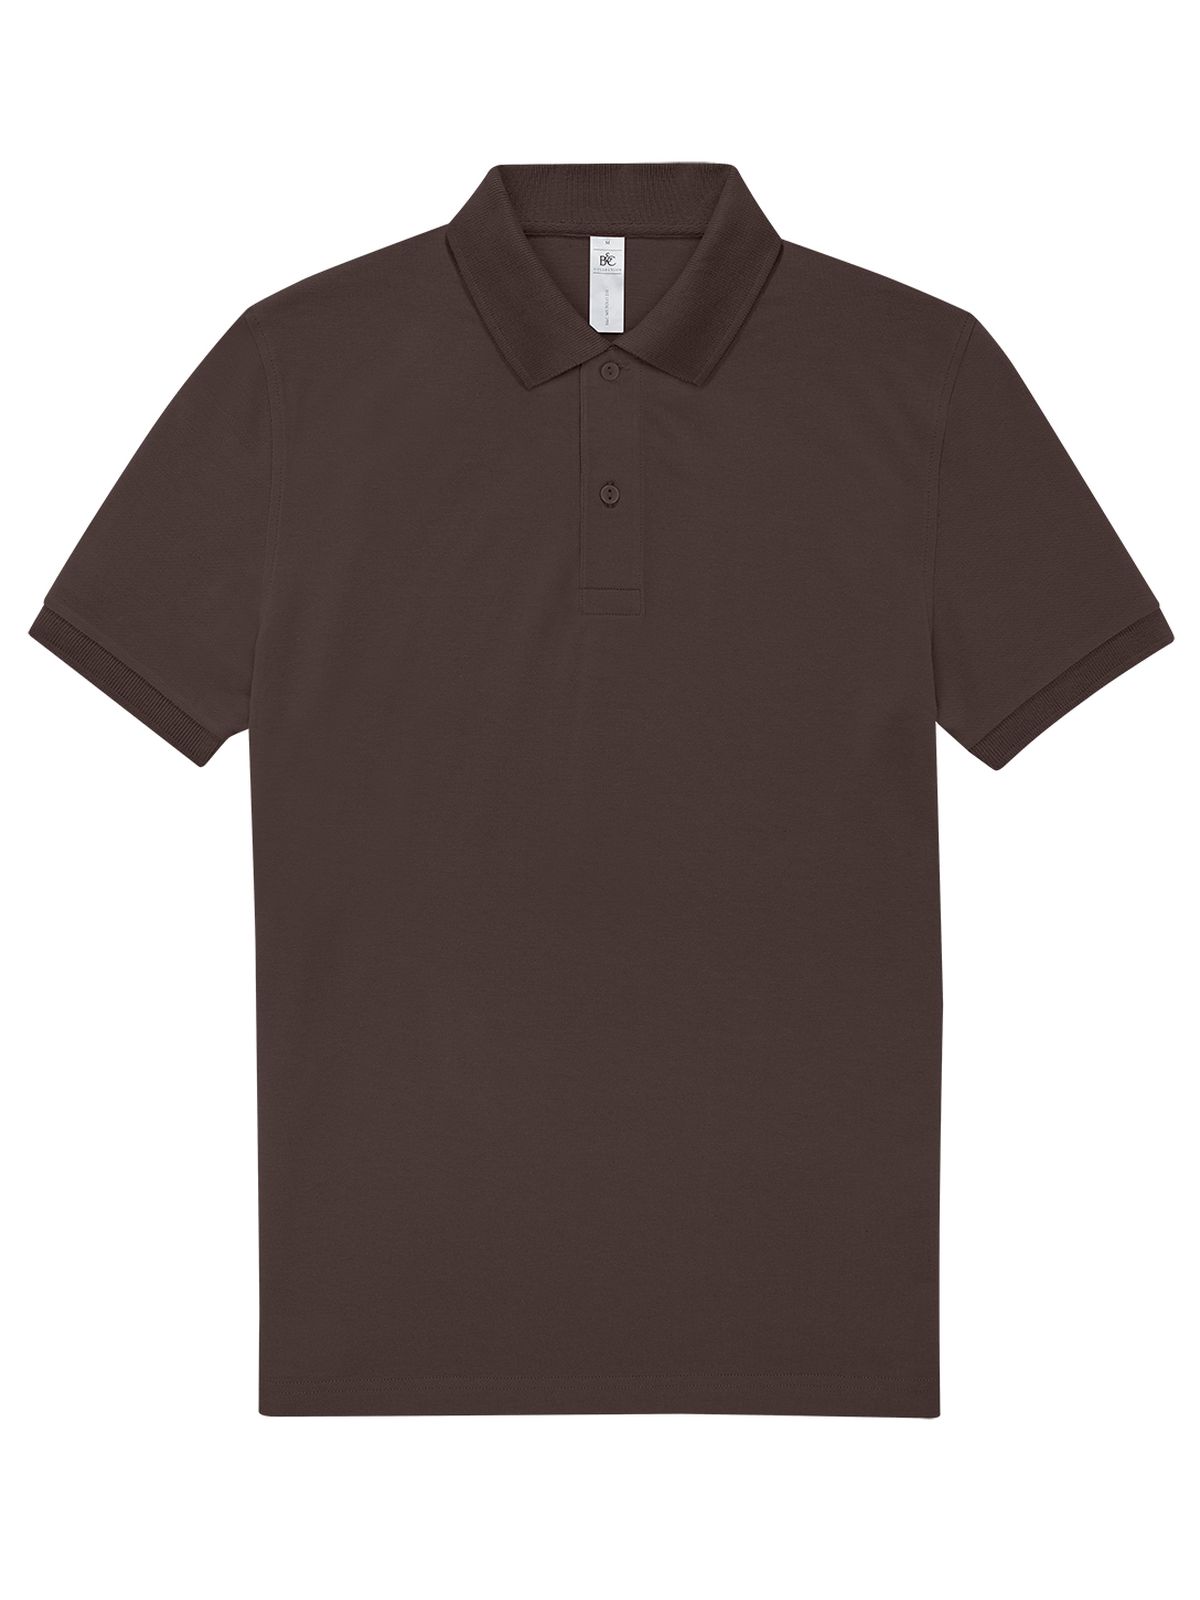 bc-my-polo-210-roasted-coffee.webp